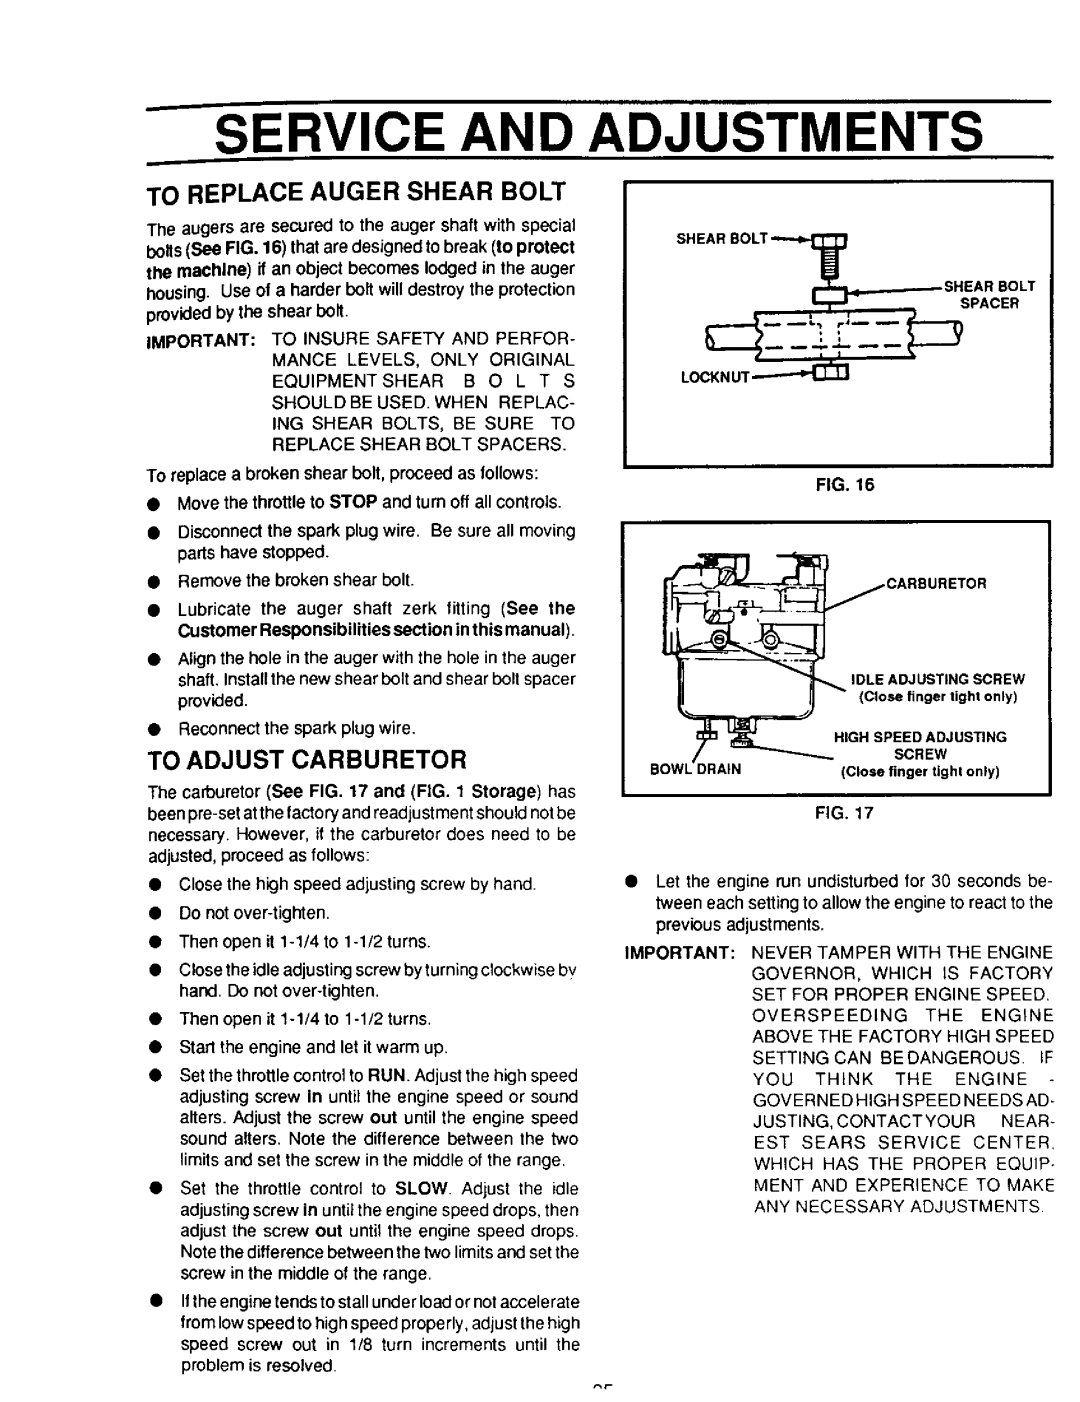 Sears 536.886331 owner manual To Replace Auger Shear Bolt, To Adjust Carburetor, Service And, Adjustments, T s,,,.o,,.T 